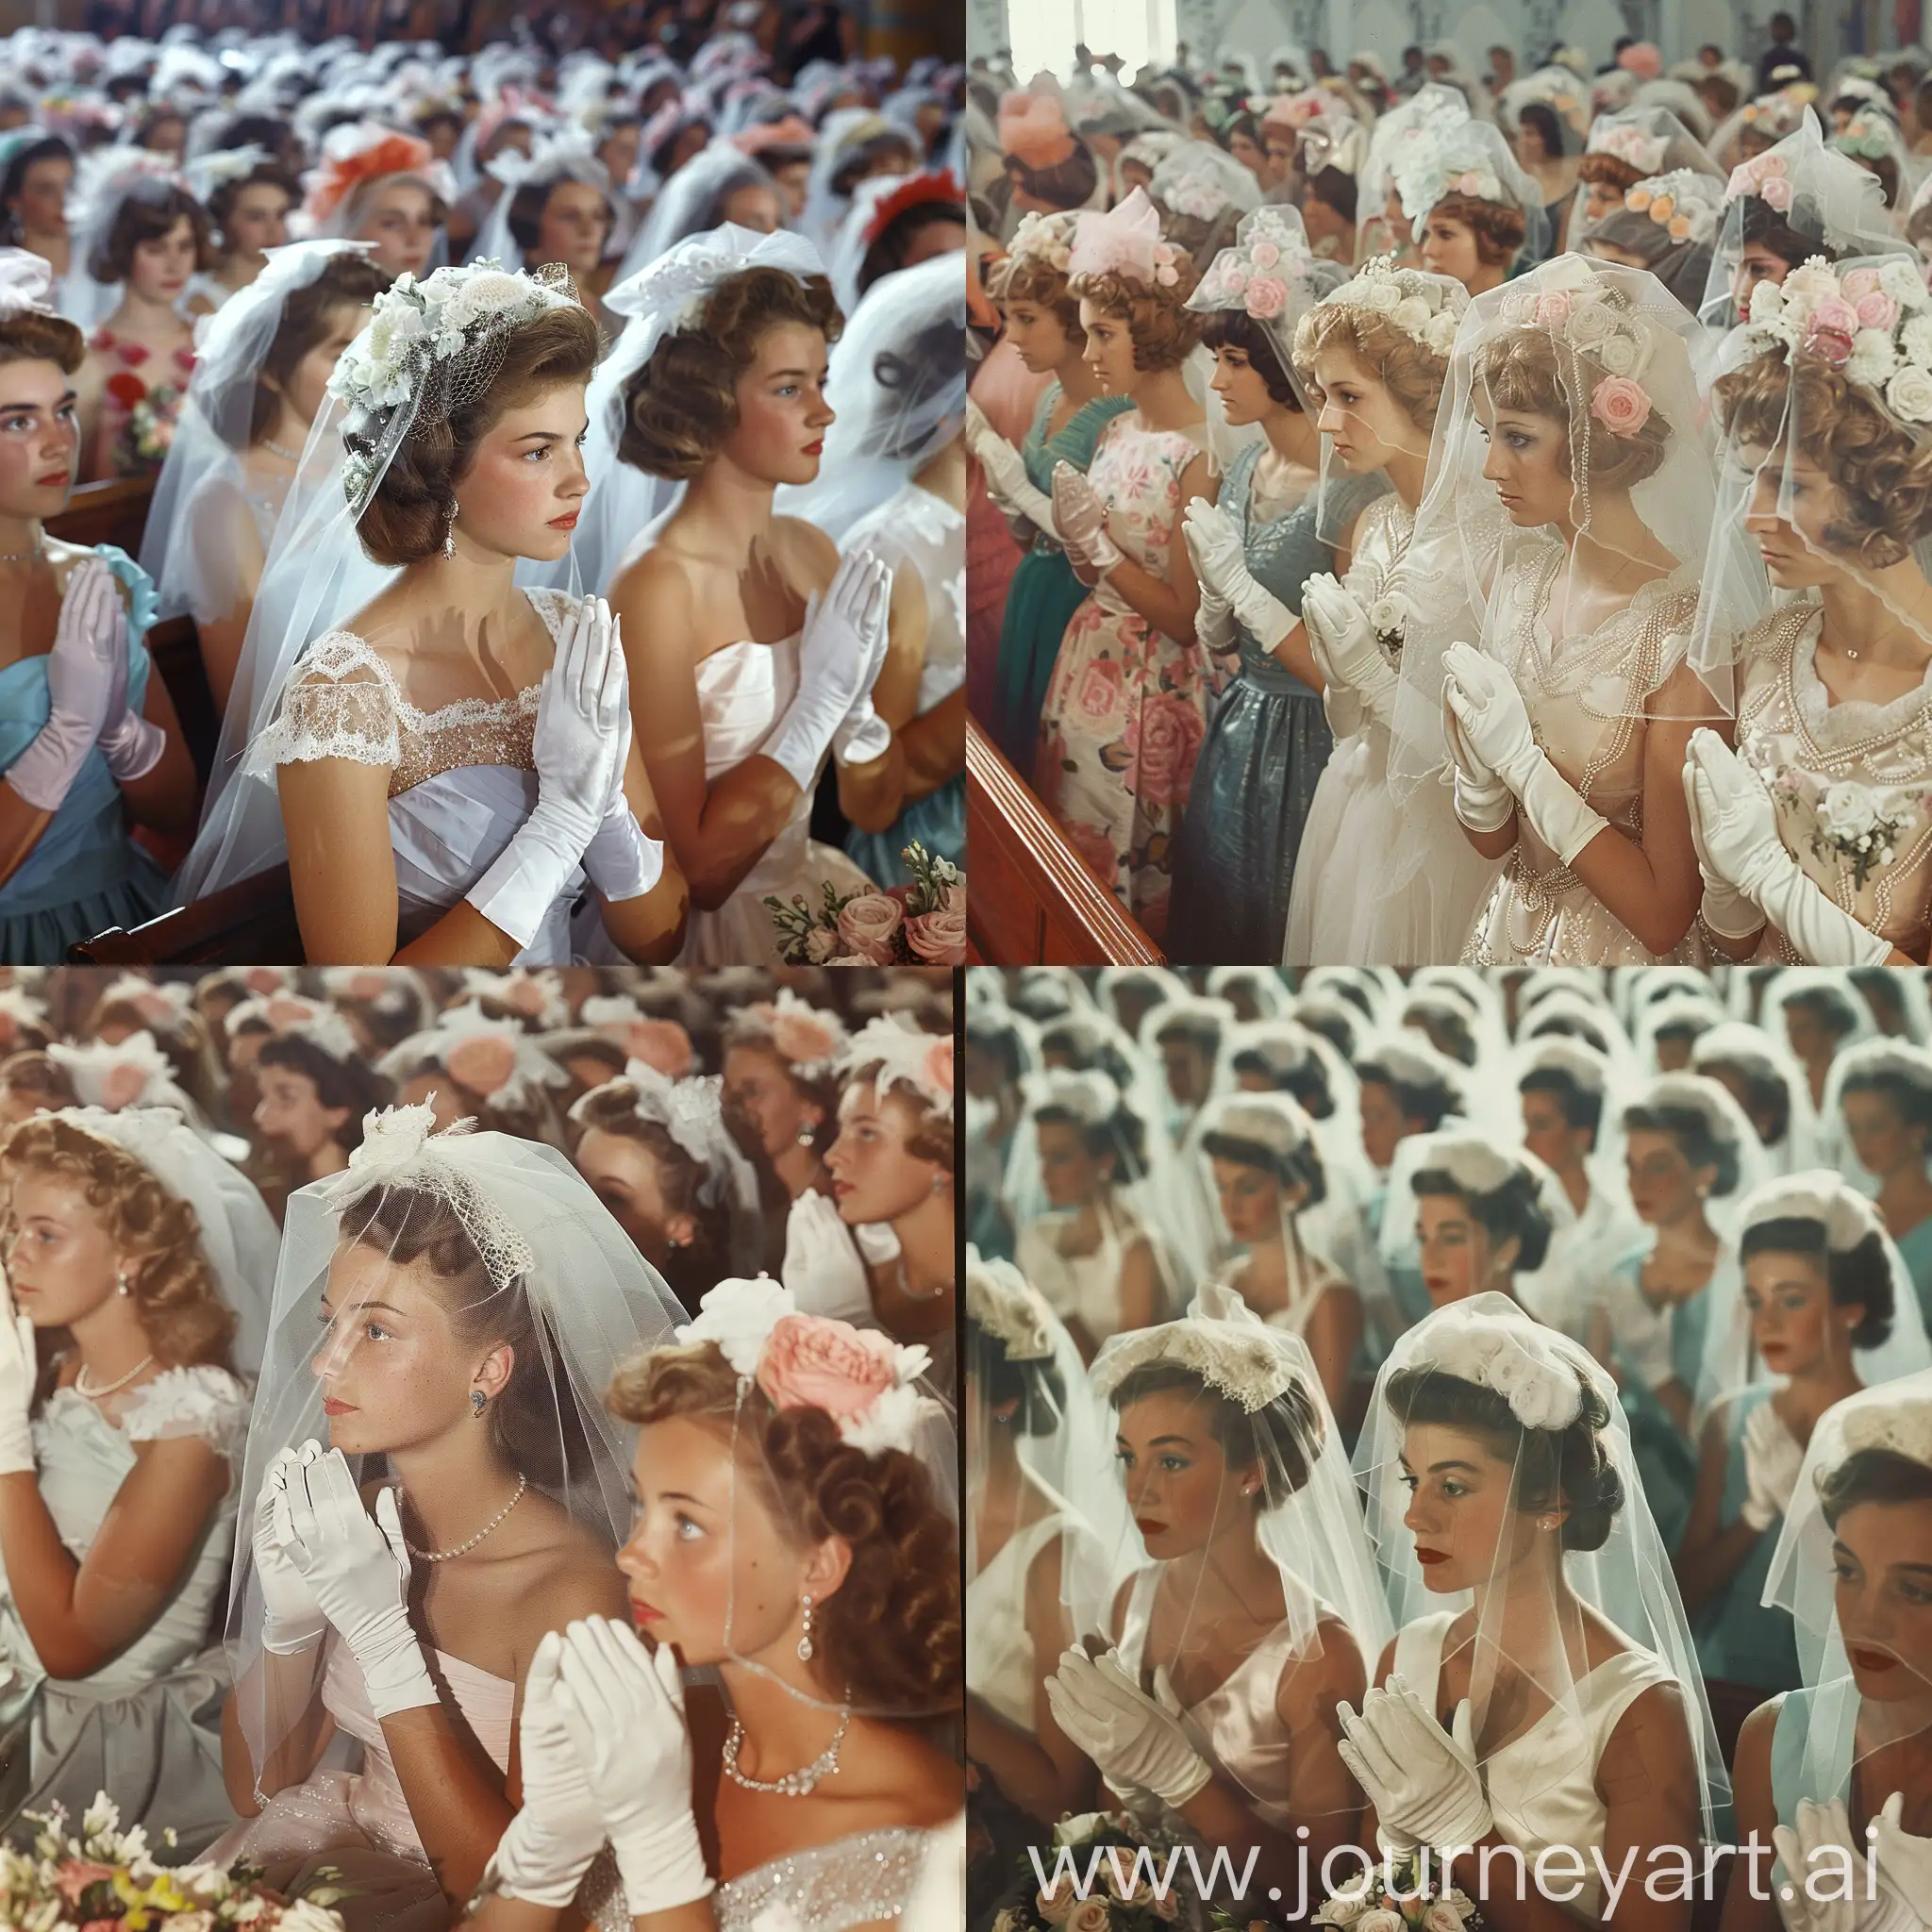 Elegant-Brides-in-Veils-and-Bouquets-Fill-a-Crowded-Church